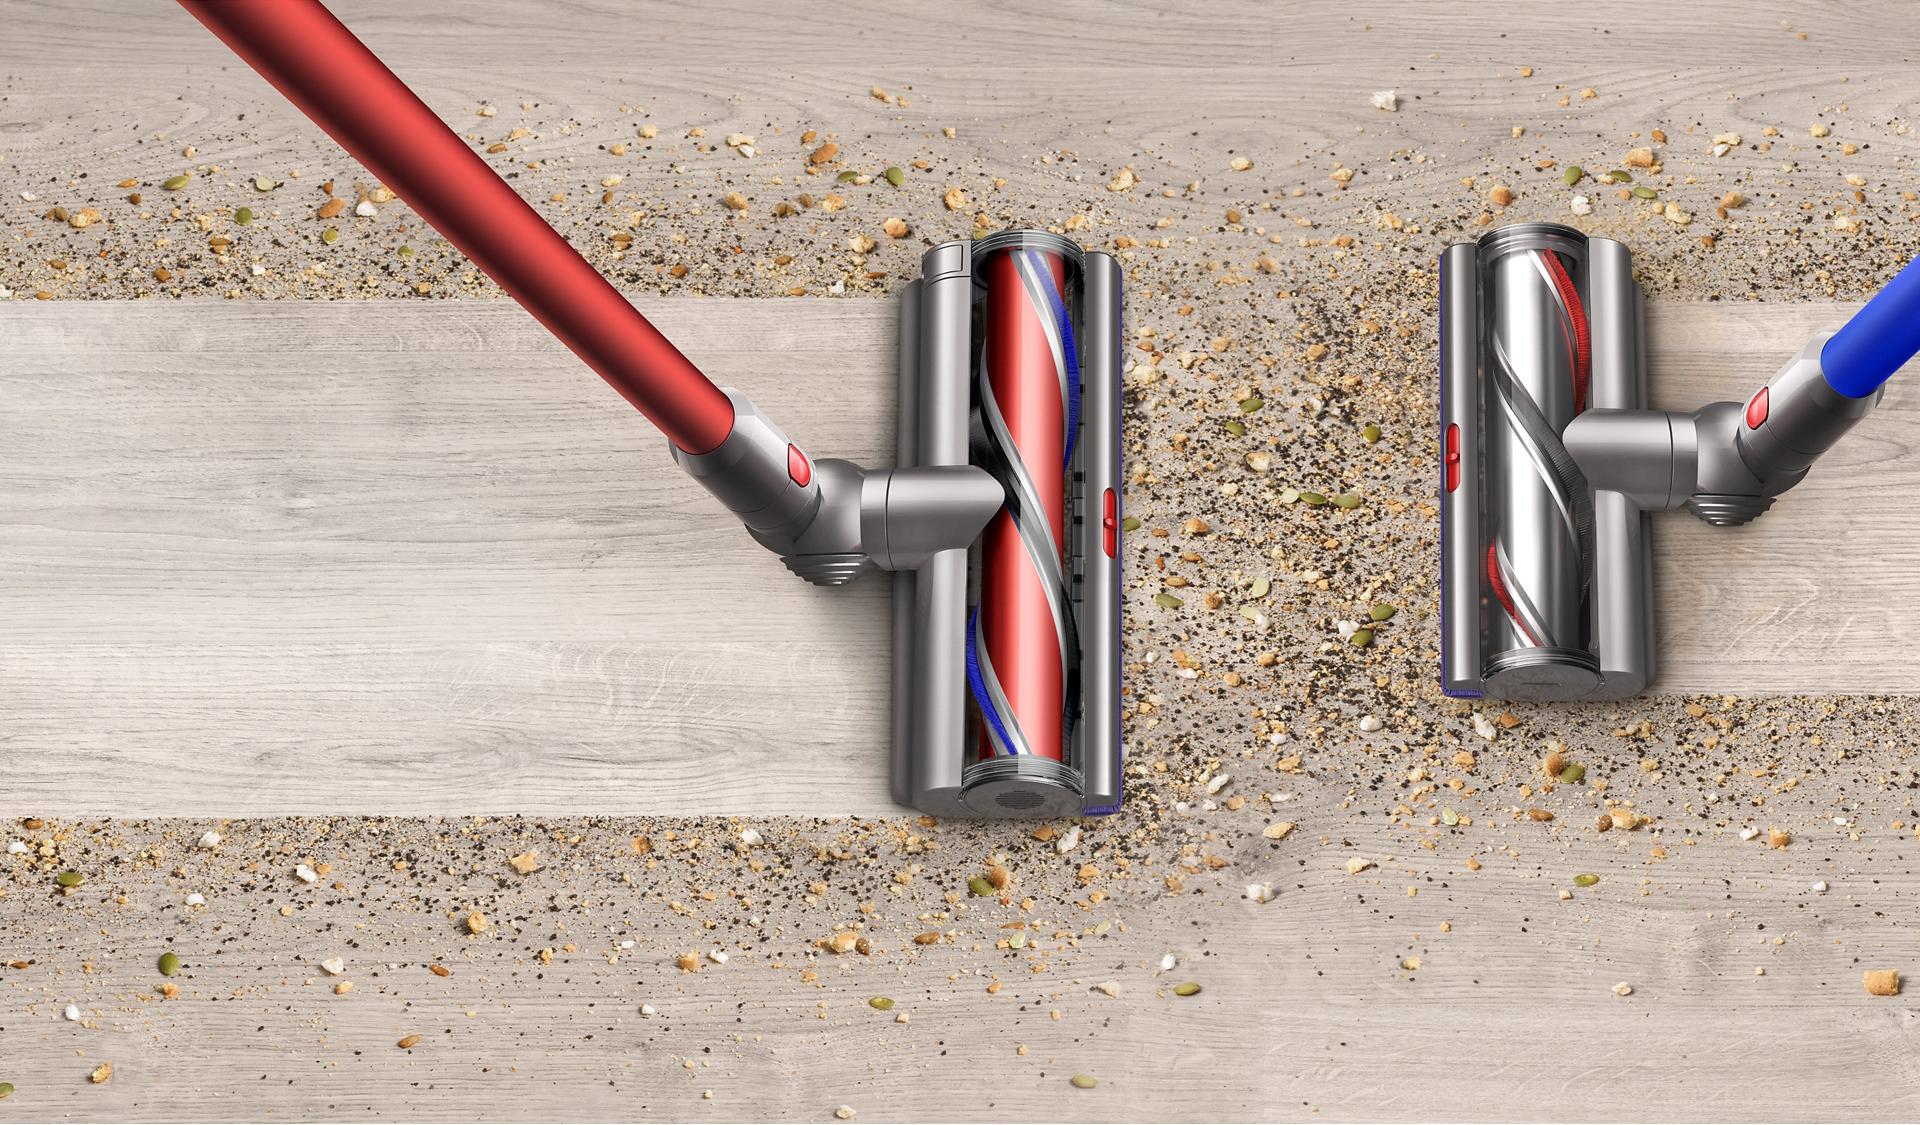 Dyson Outsize High Torque XL cleaner head cleaning 25% more floor than a Dyson V11 High Torque cleaner head